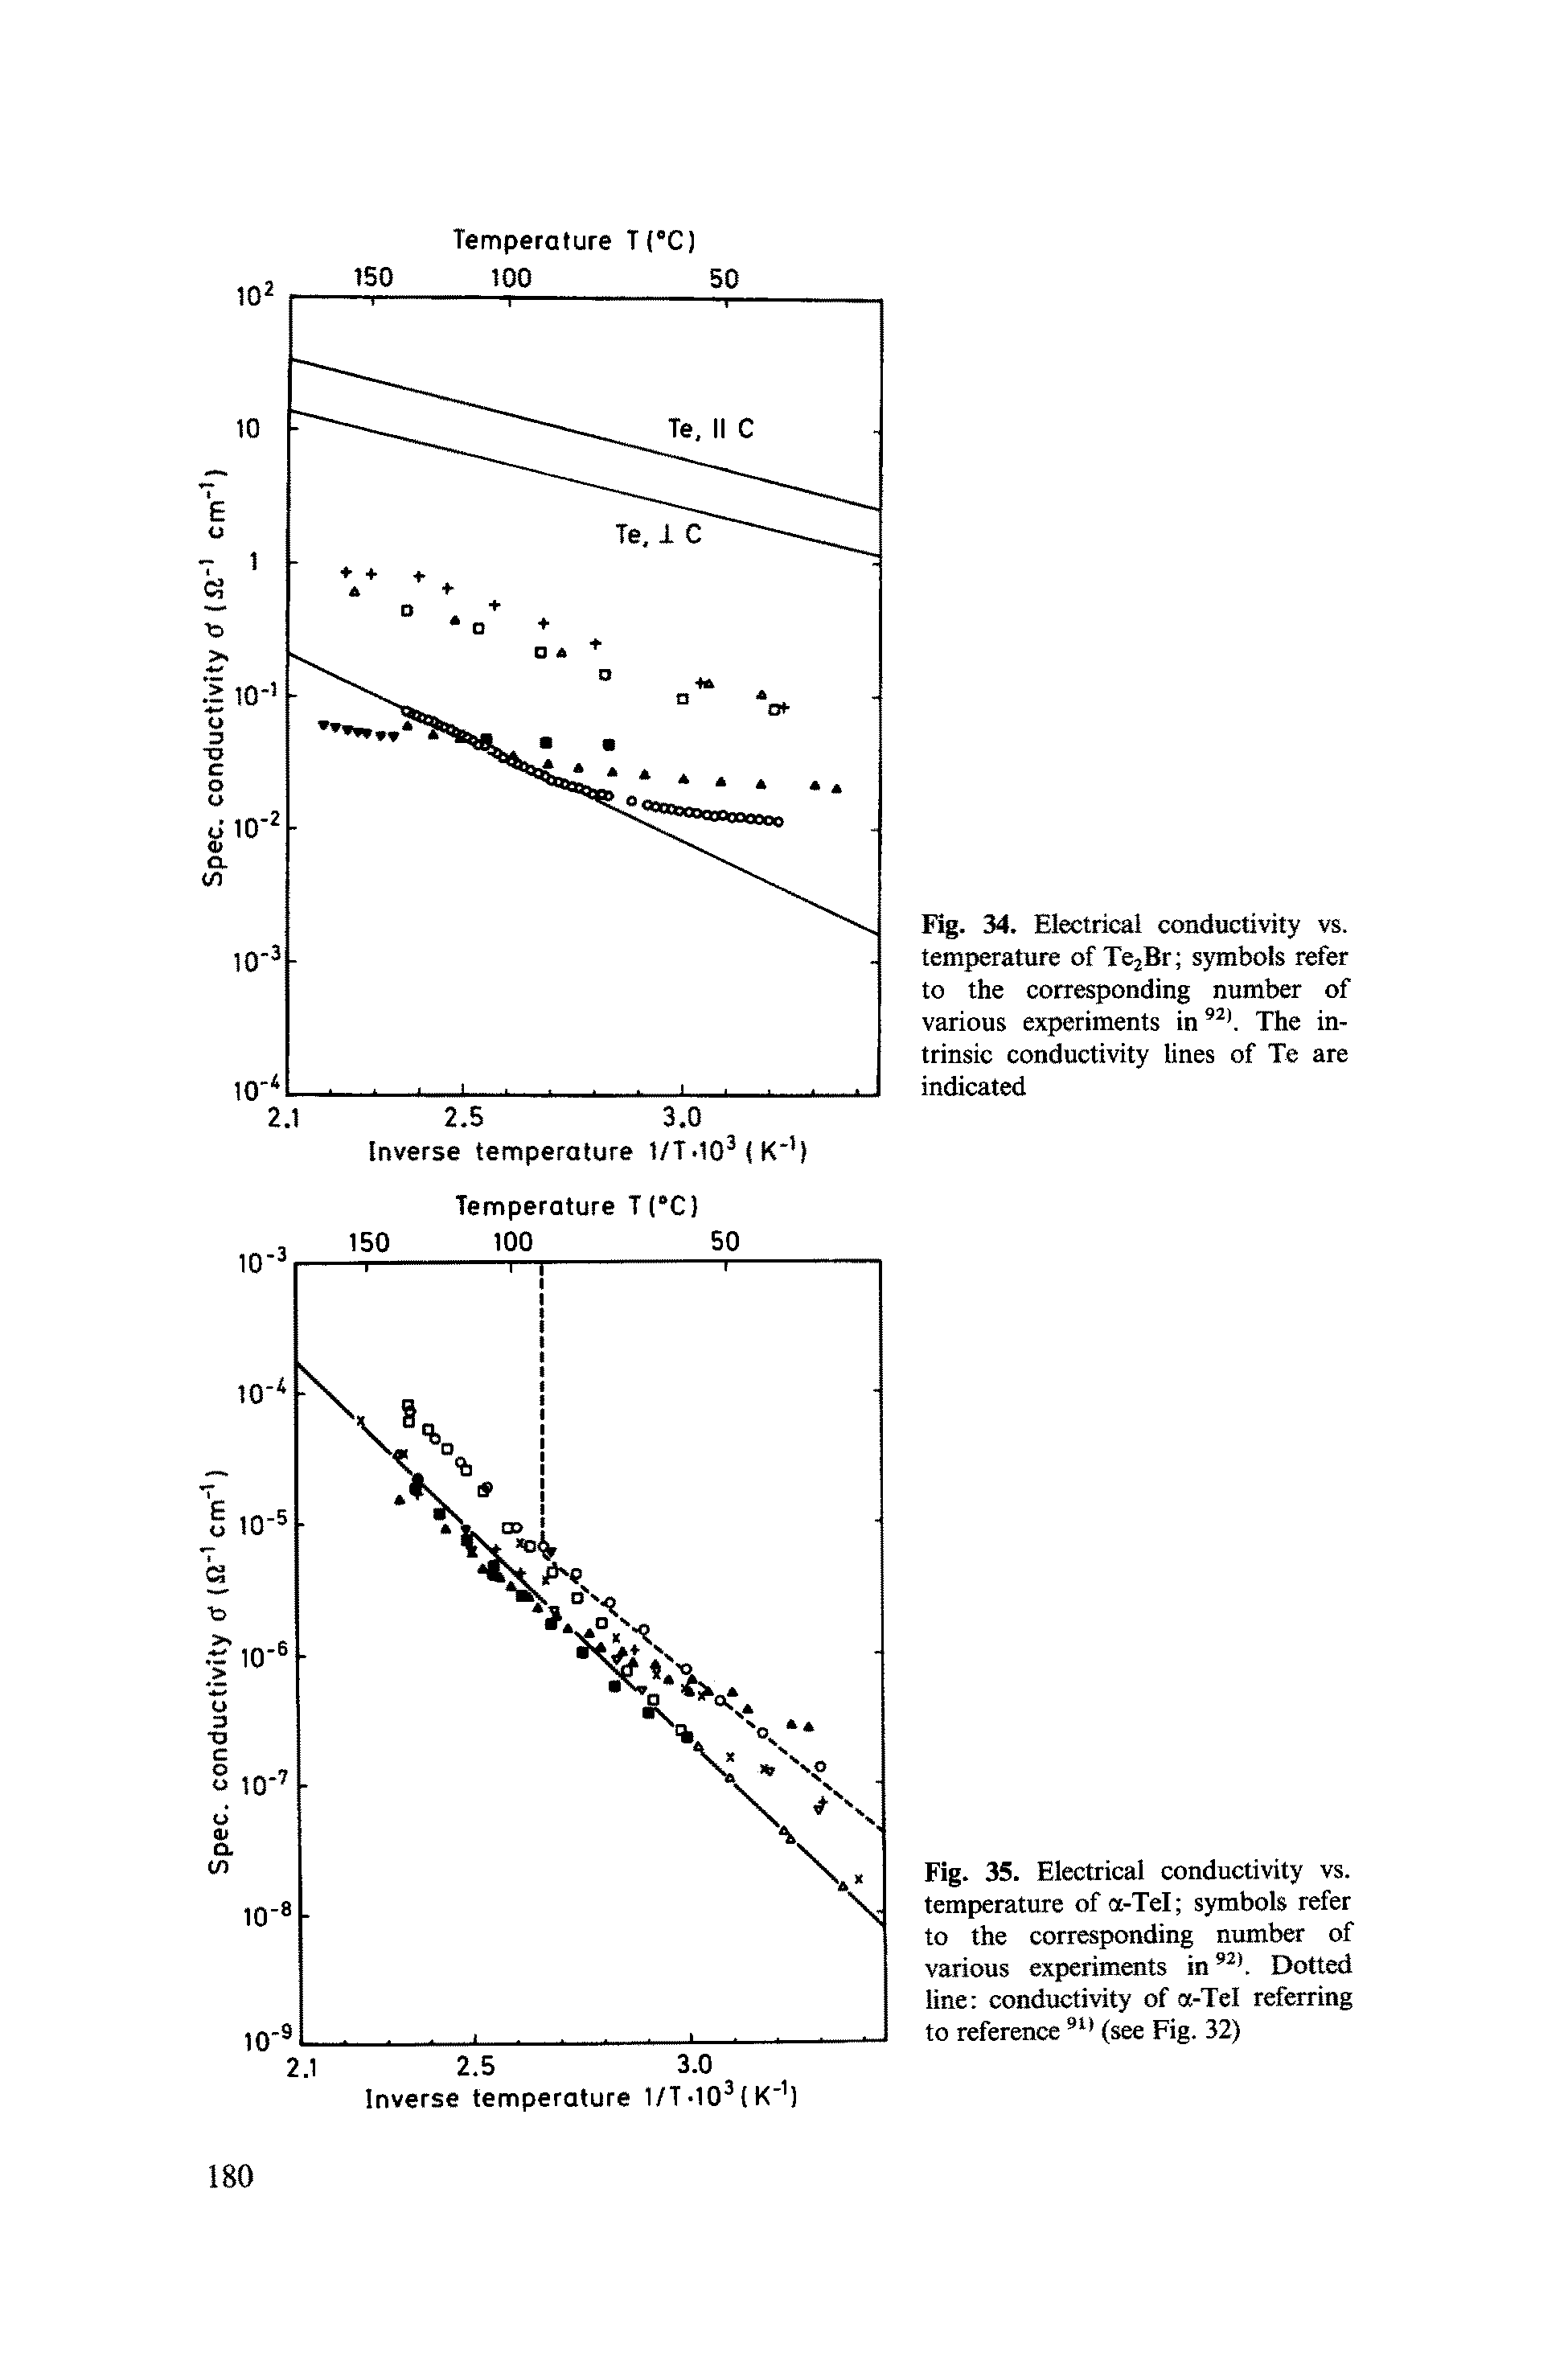 Fig. 35. Electrical conductivity vs. temperature of a-Tel symbols refer to the corresponding number of various experiments in f Dotted line conductivity of a-Tel referring to reference (see Fig. 32)...